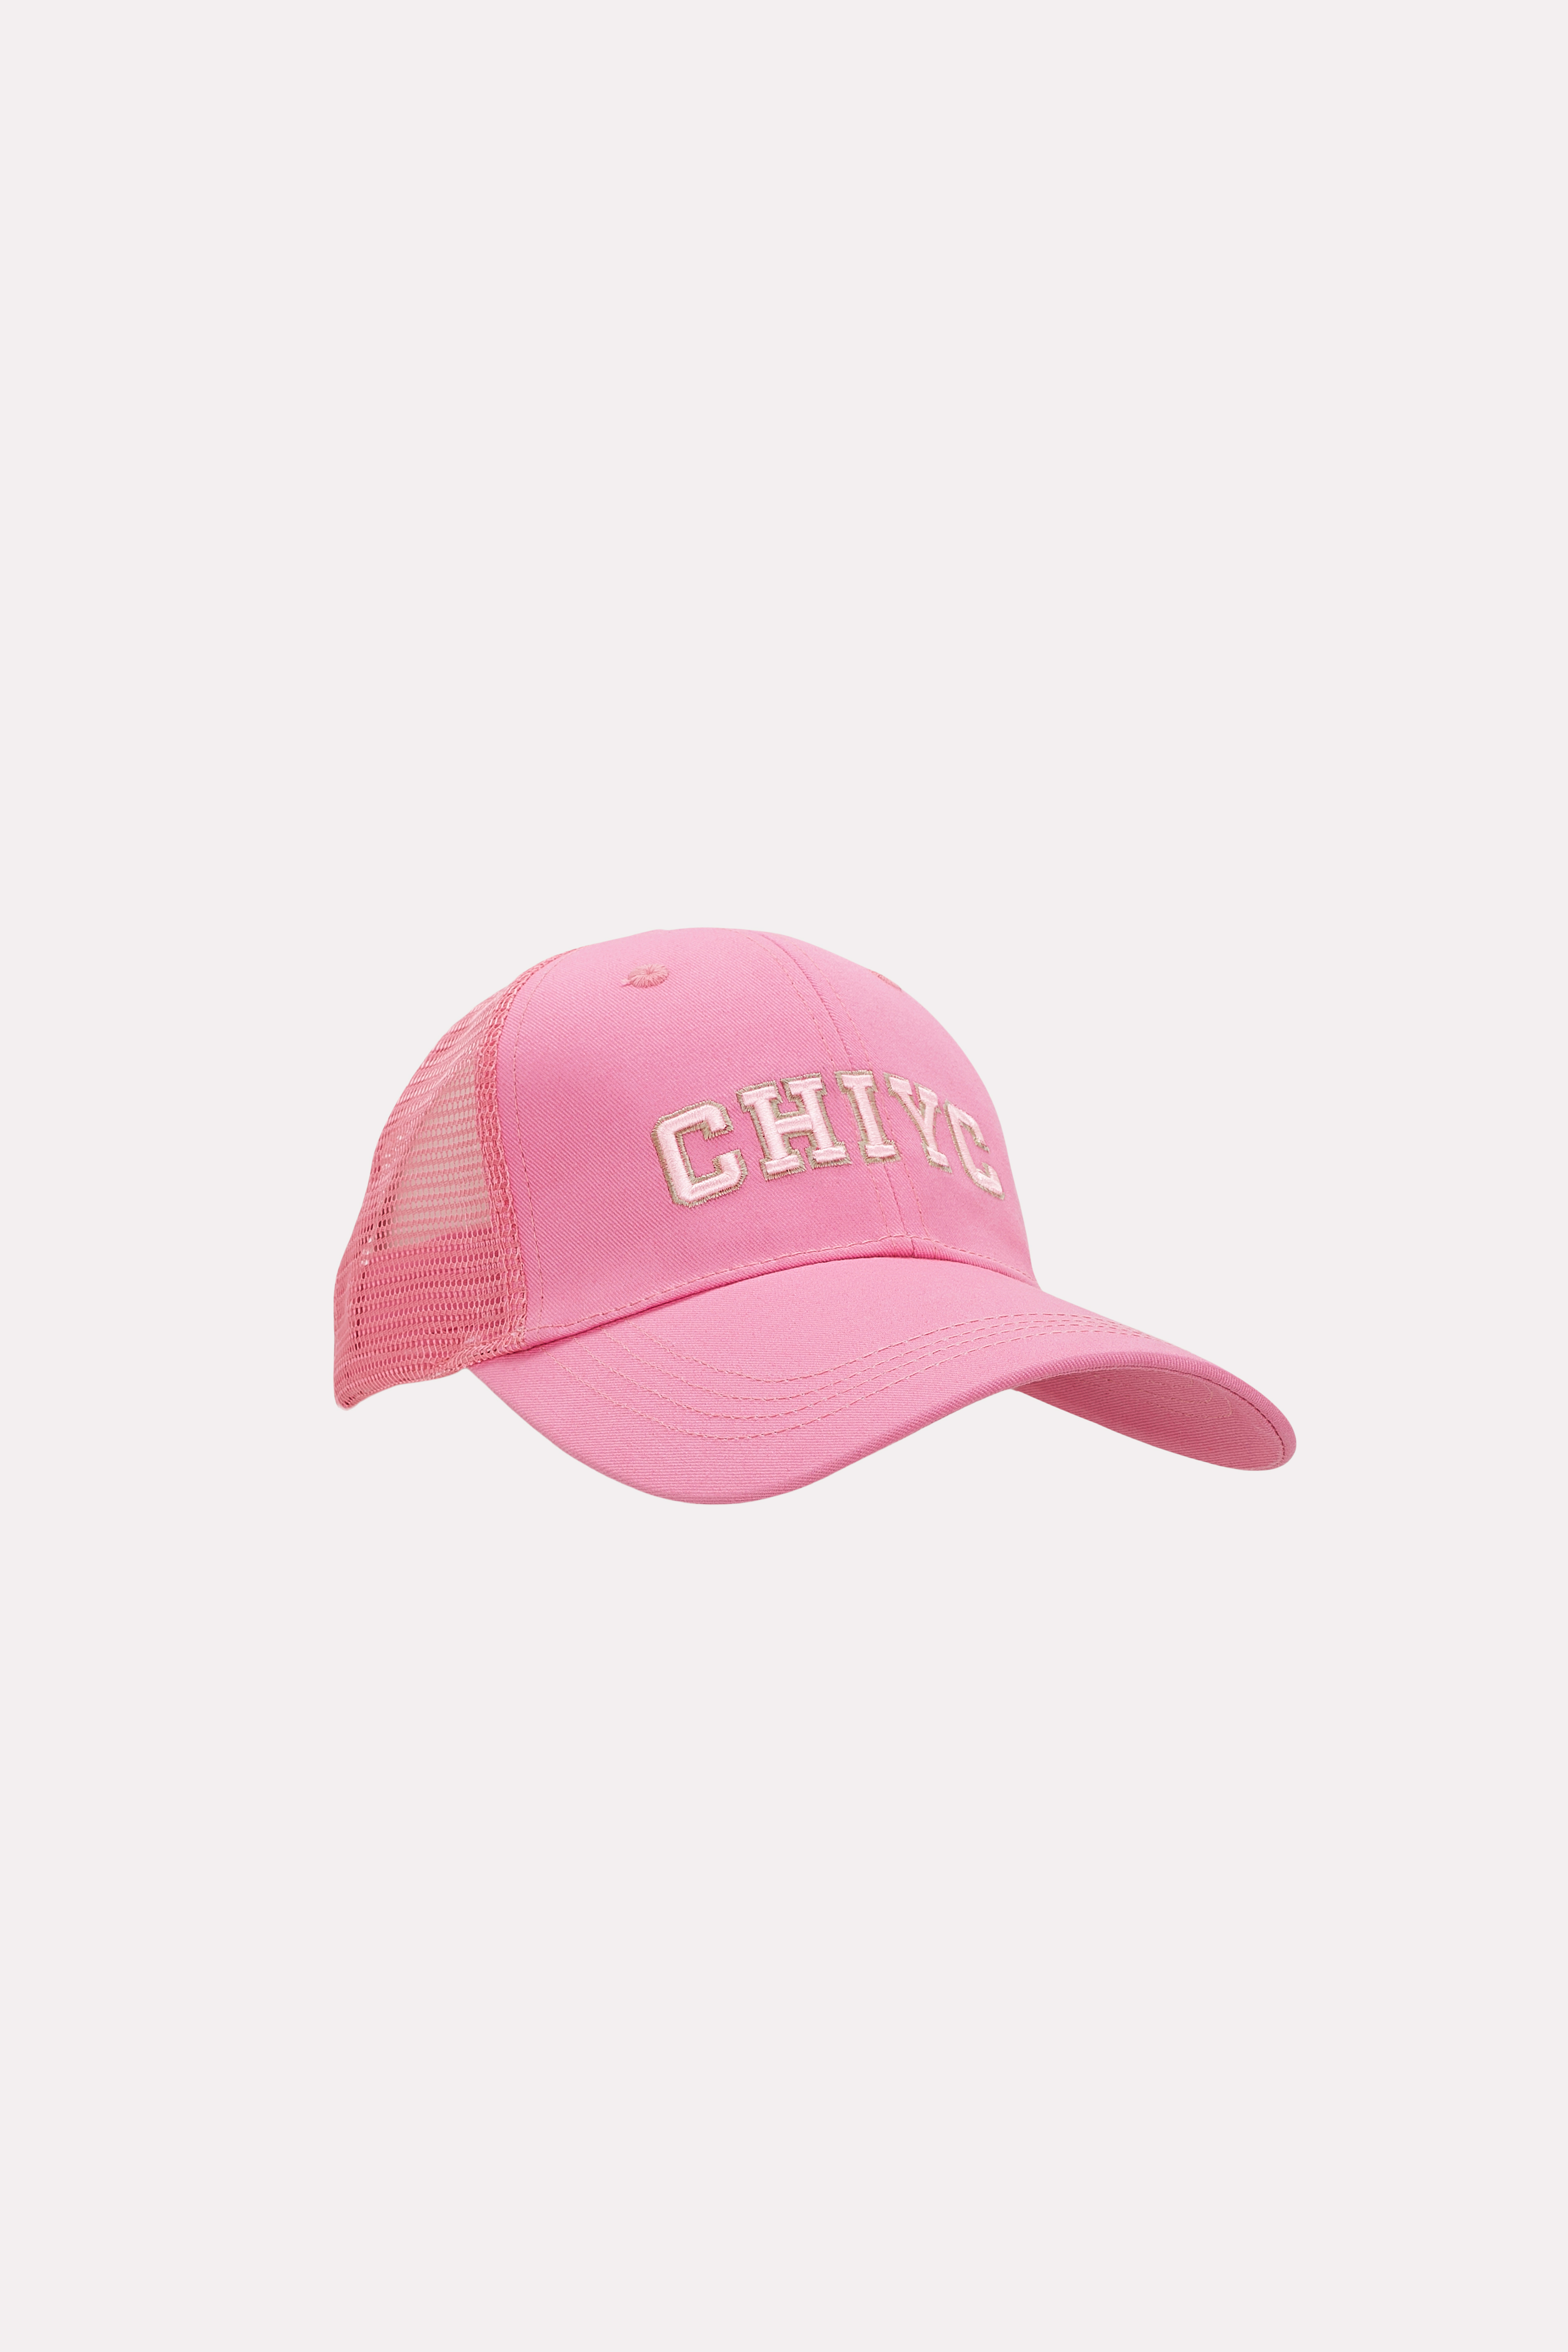 CHIYC BASEBALL CAP Accessories on sale 2022